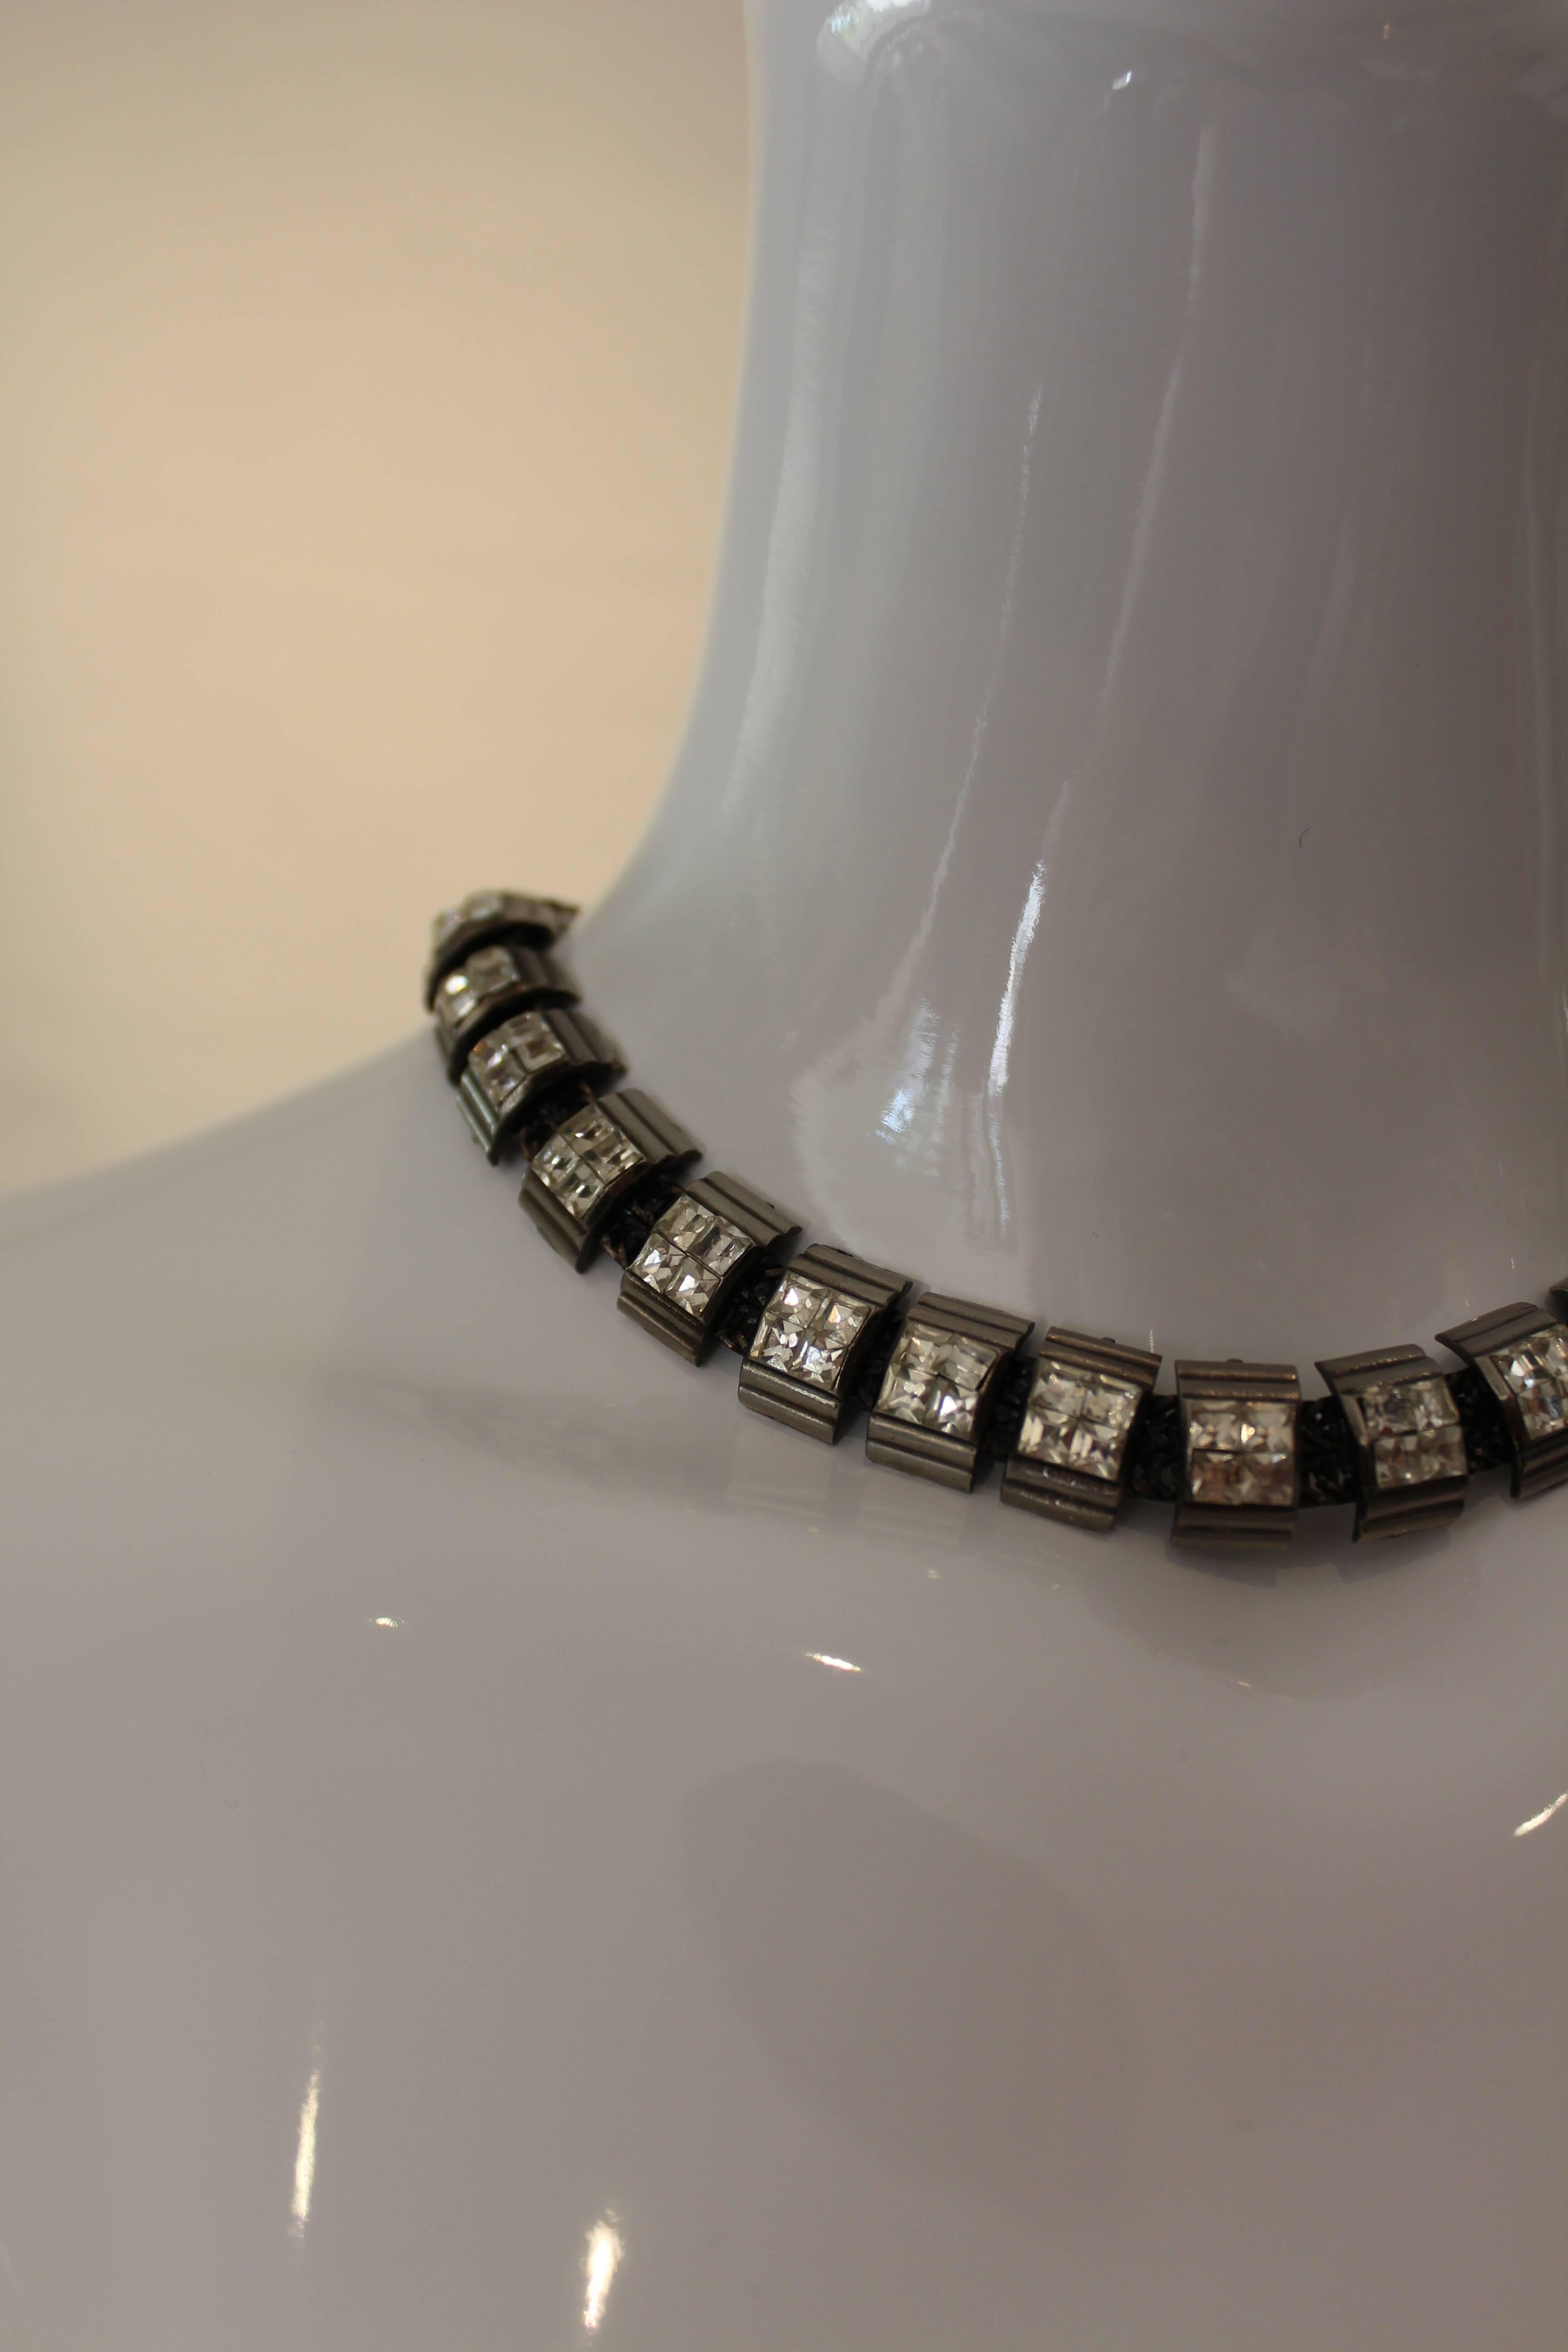 This modern mesh chain Fendi necklace is well constructed and finished off with Fendi logo clasp.  It's oxidized dark silver tone chain with chunky rhinestone embellishments would be  a great investment piece for any fashionista.